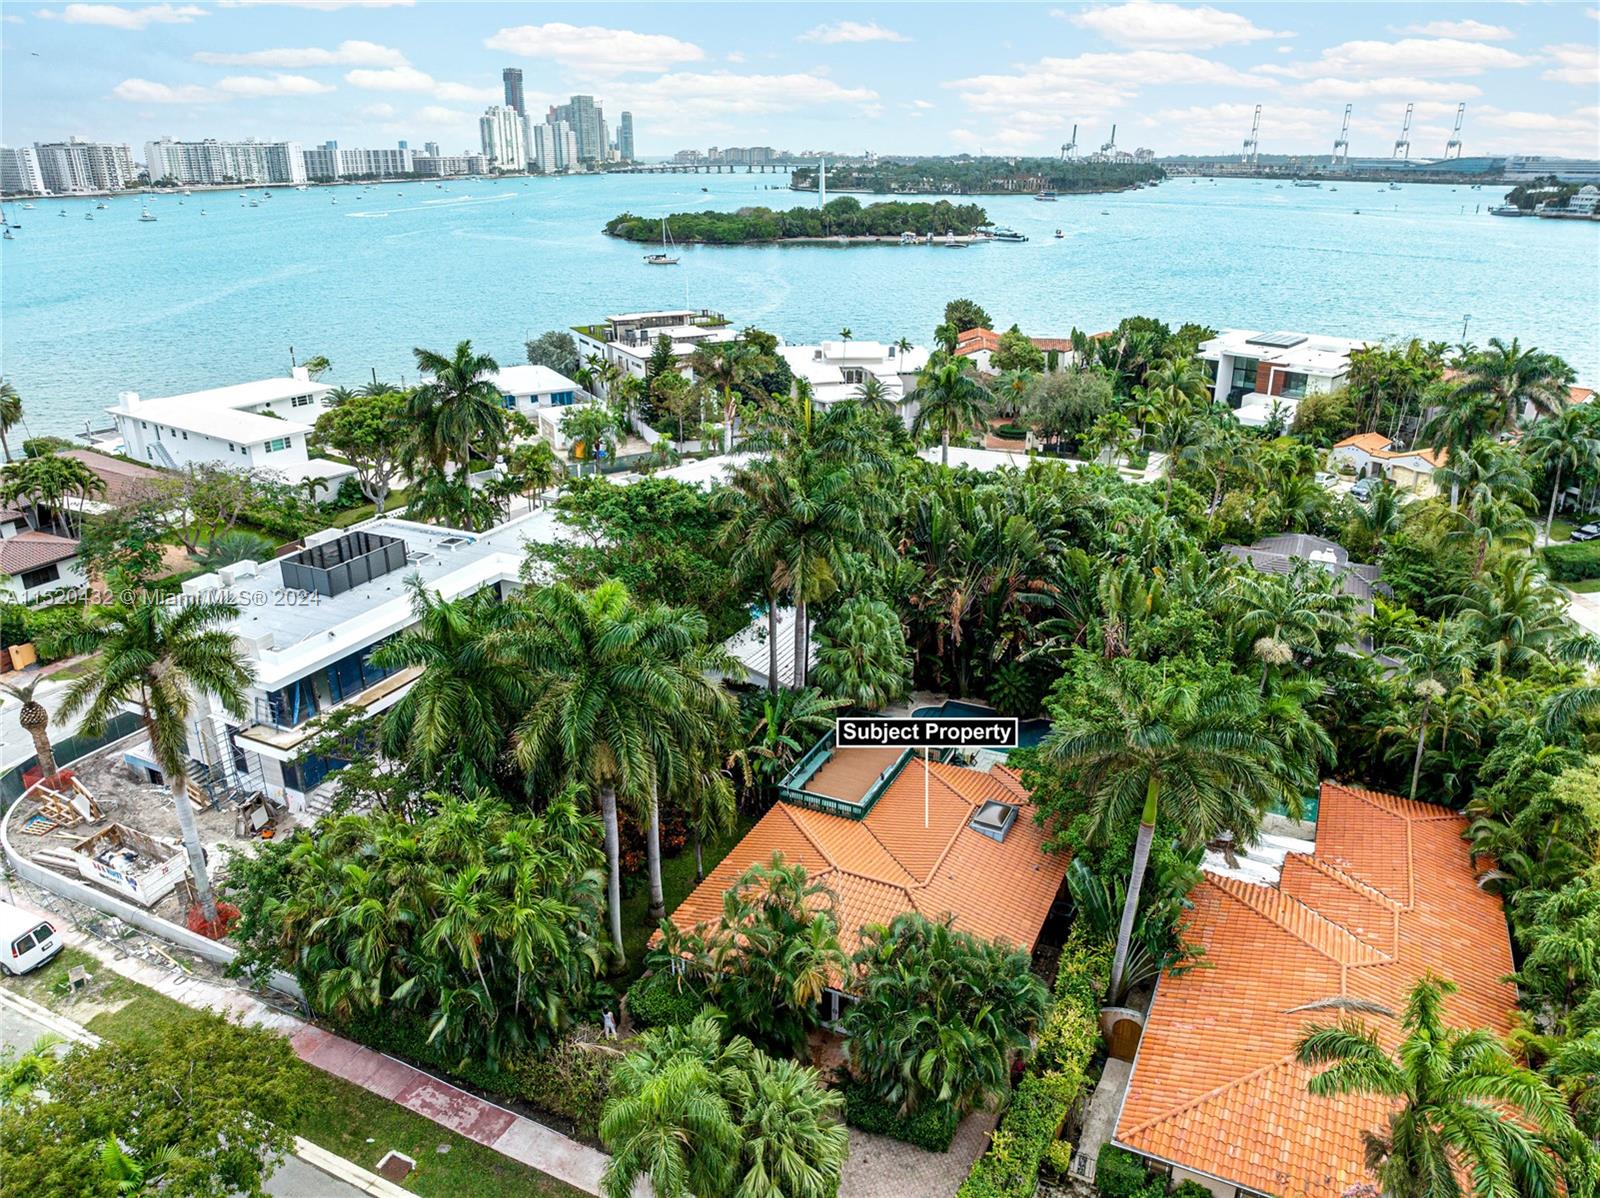 Immerse Yourself in Island Luxury! This impeccably maintained 3-bed, 2.5-bath residence sits on an oversized 11,250 sq ft lot south on Rivo Alto best of the Venetian Islands jewel. A prime location puts you within walking distance of Sunset Harbour's lively atmosphere, multiple gyms, yoga, restaurants, Fresh market grocery food, and children's park. This charming home seamlessly merges style and comfort, providing a move-in-ready sanctuary. This island haven invites you to experience the ease of sophisticated living, offering a unique blend of convenience and elegance. Don't miss the opportunity to claim this extraordinary property as your own—schedule your showing today! A great opportunity to redevelop as well and build a beautiful
mansion.